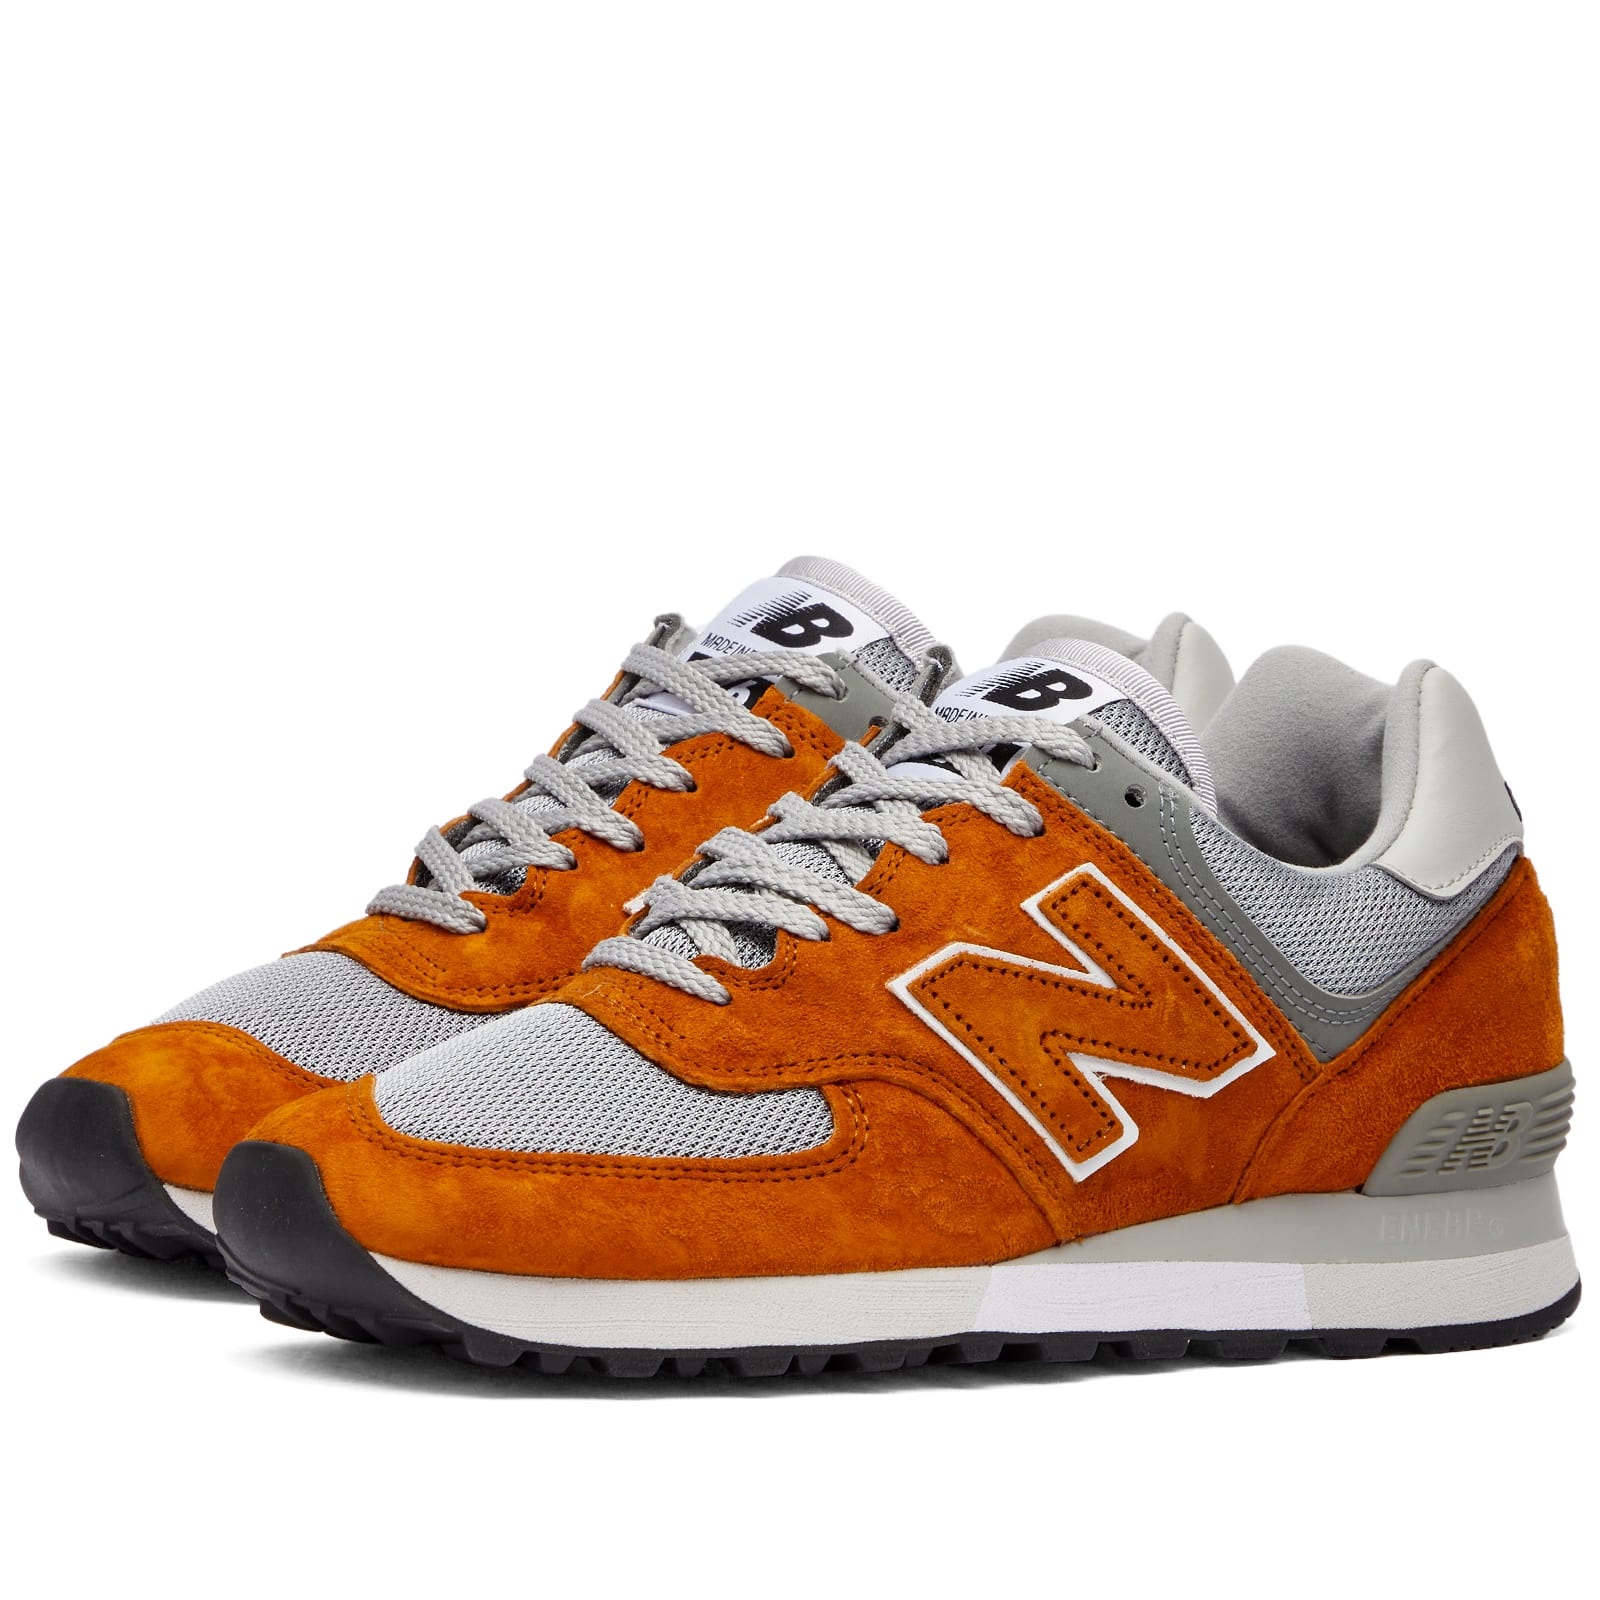 New Balance OU576OOK - Made in UK - 1